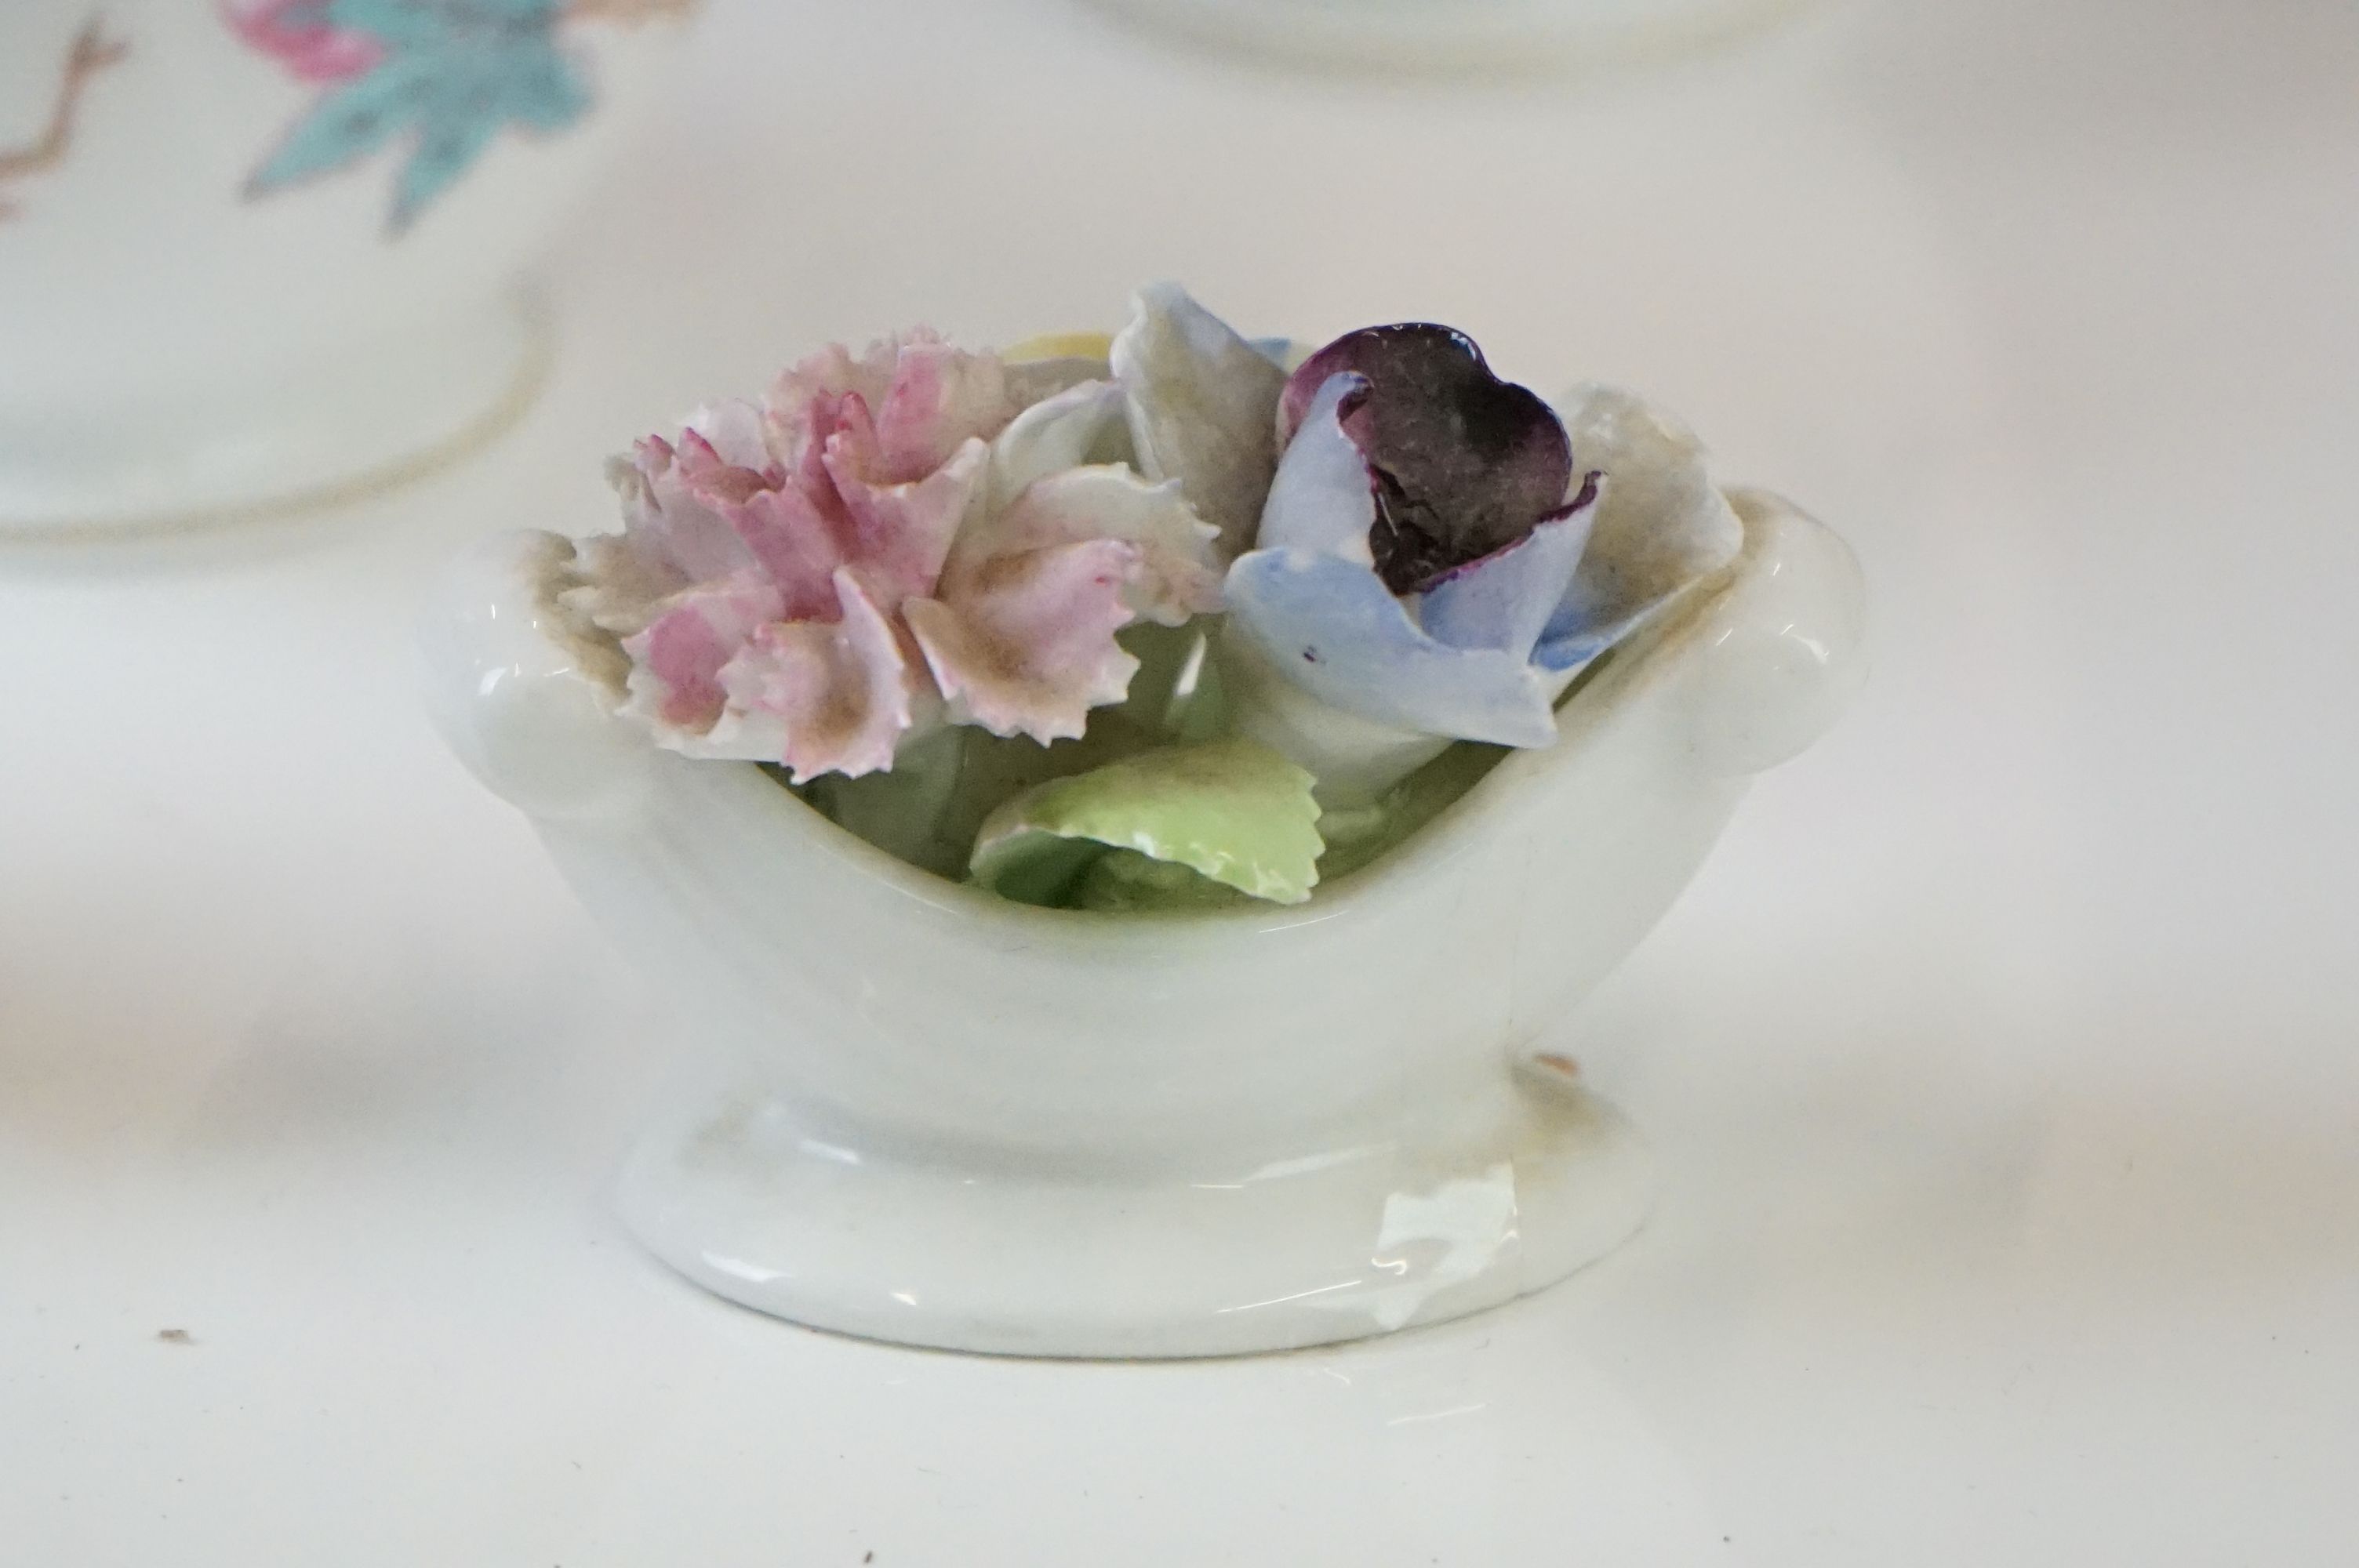 Mintons porcelain tea service decorated with songbirds amongst peonies, to include 6 teacups & - Image 3 of 8